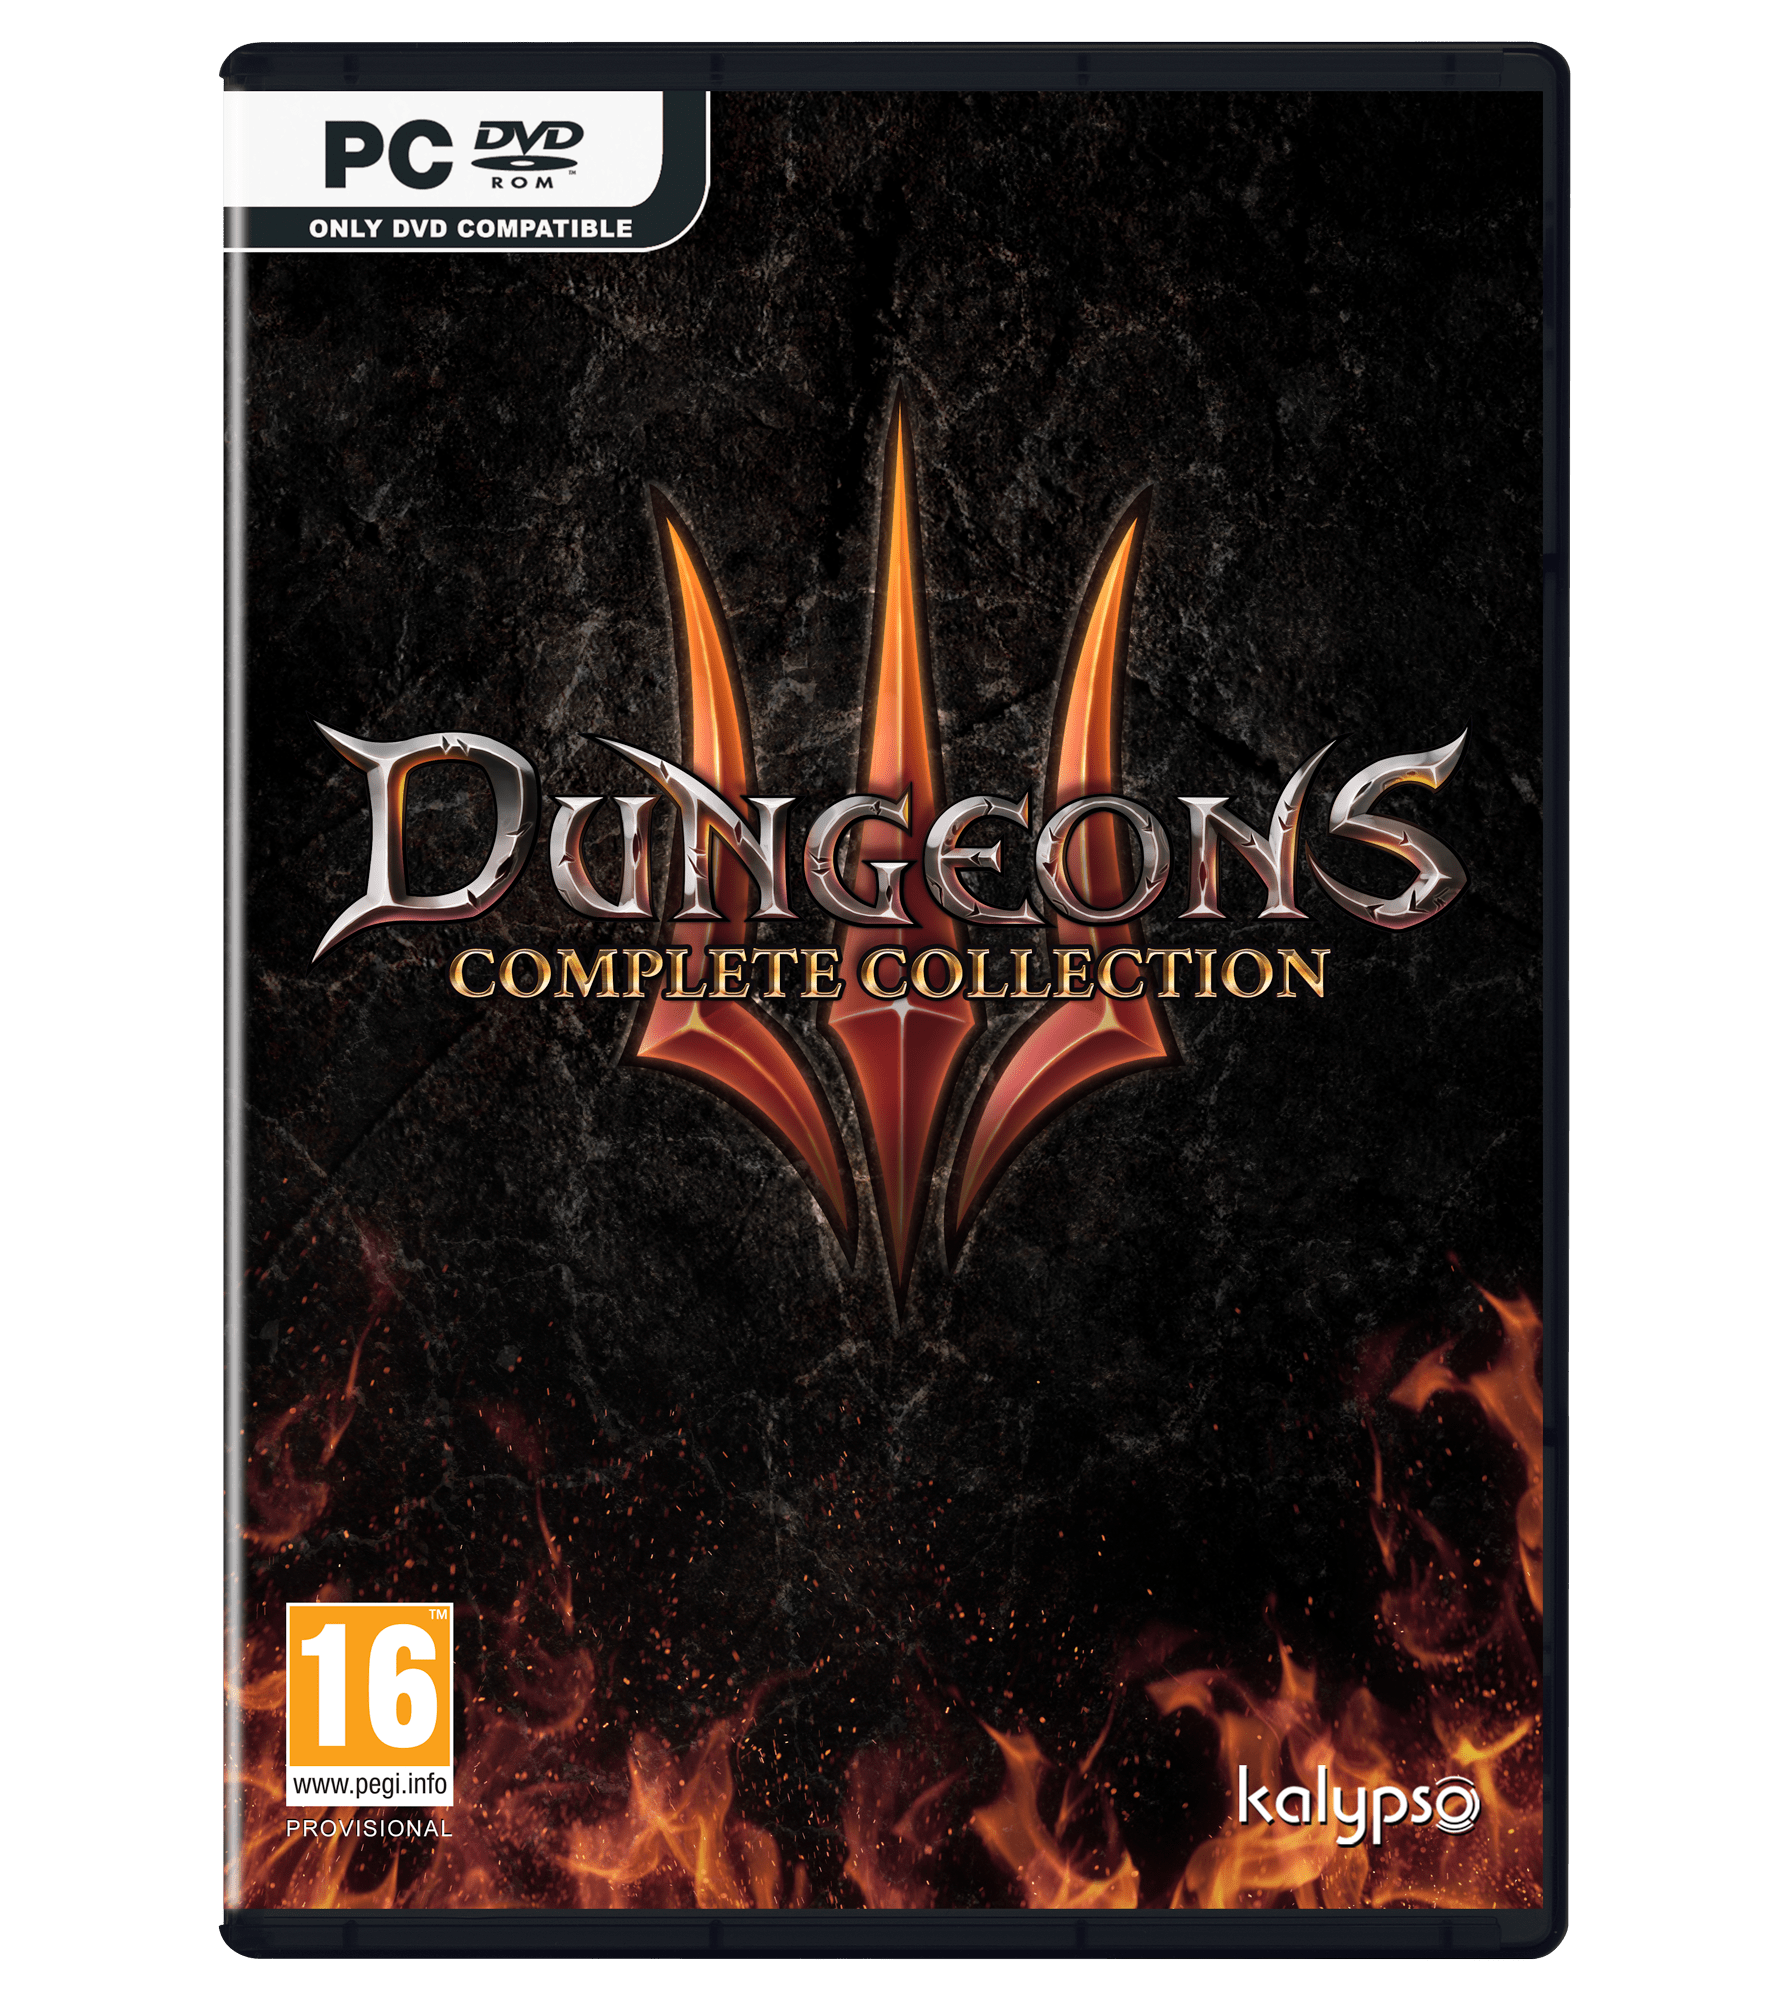 Dungeons 3: Complete Collection (PC)